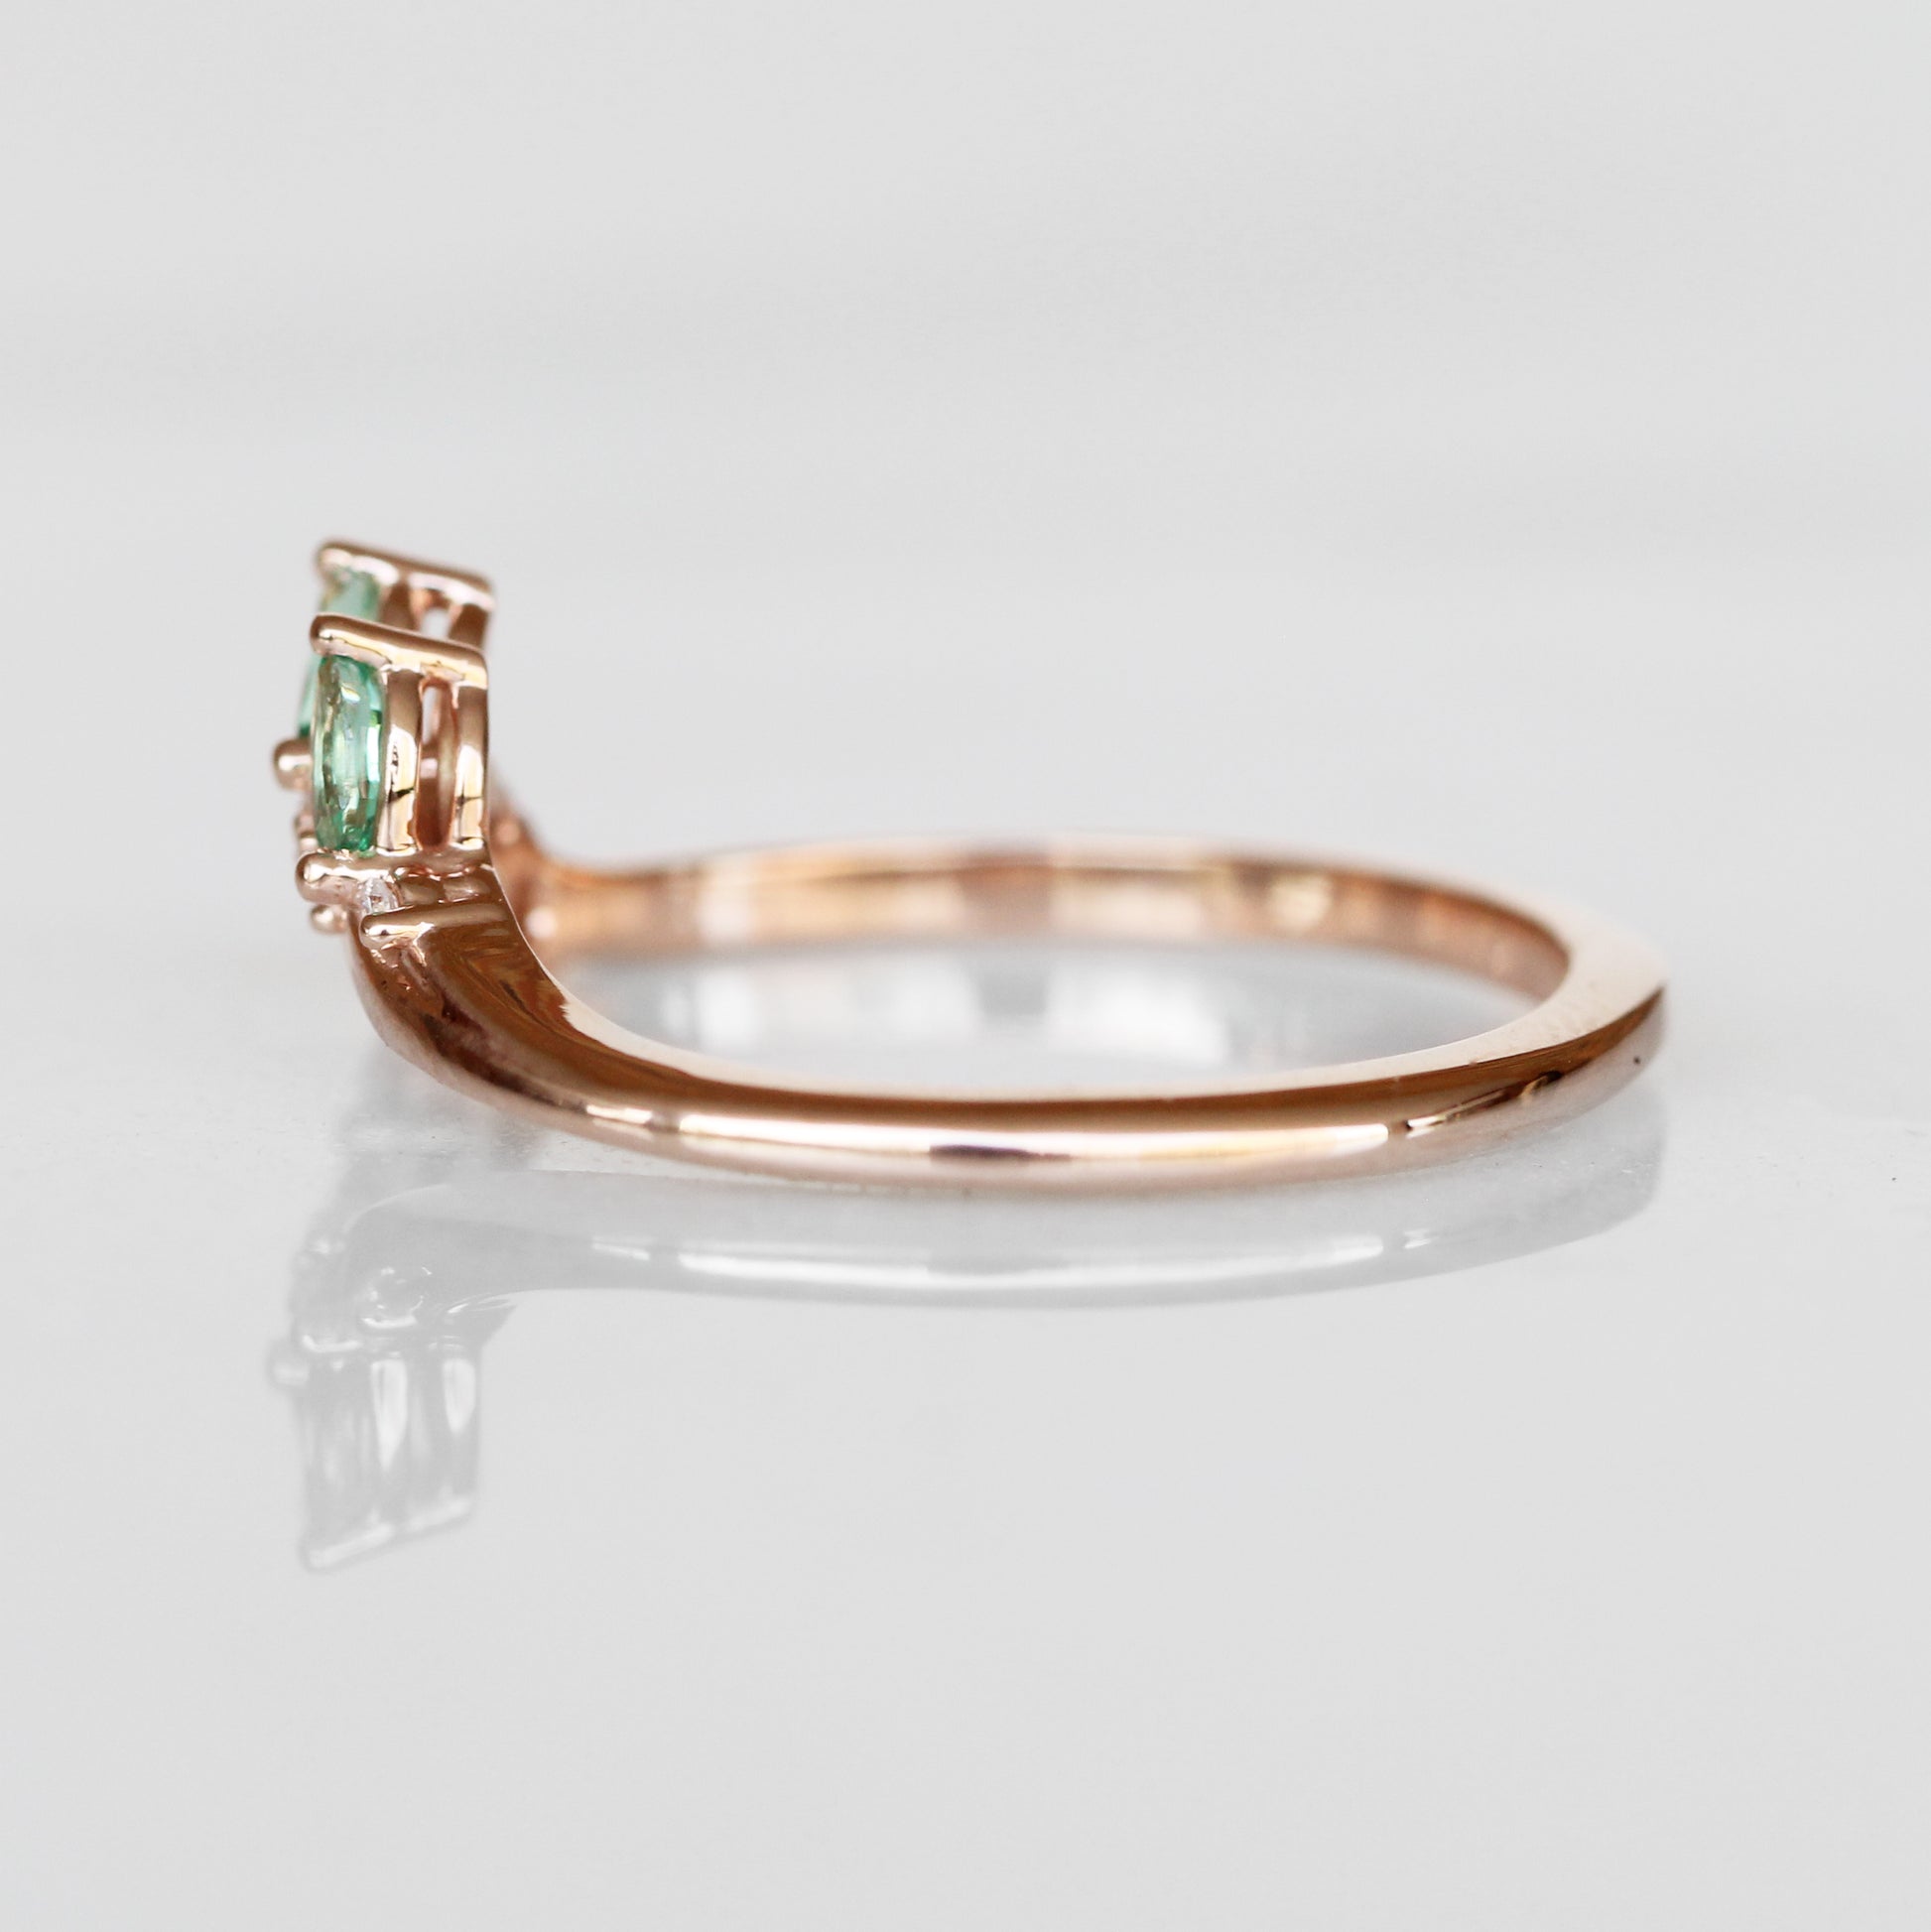 Clarissa - Floral contour wedding stacking diamond and emerald band - Midwinter Co. Alternative Bridal Rings and Modern Fine Jewelry